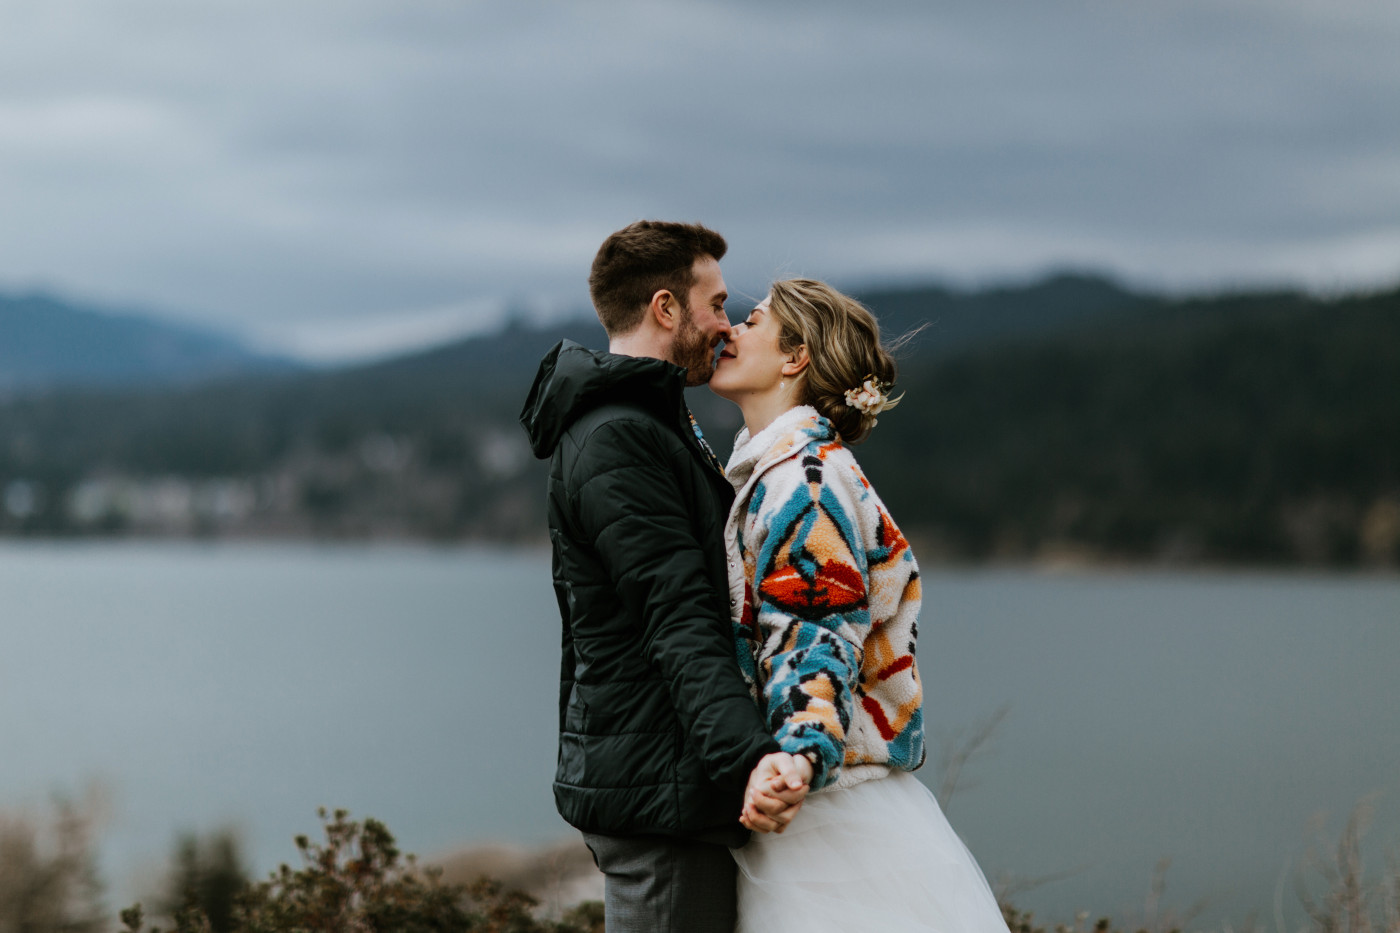 Allison and Lennie kiss in the wind. Elopement photography at Columbia River Gorge by Sienna Plus Josh.